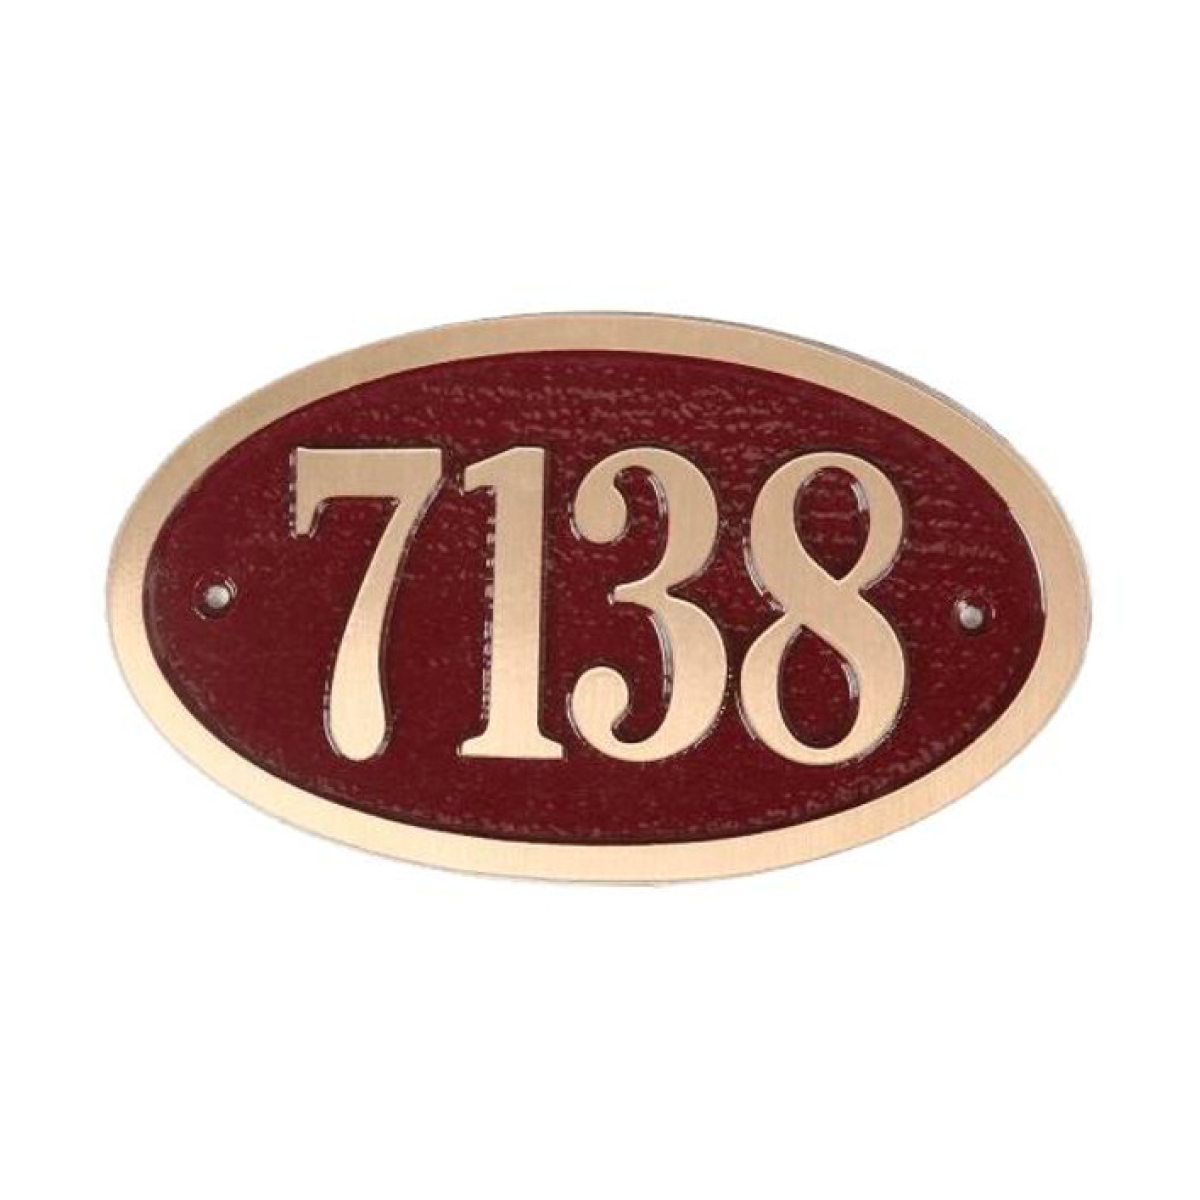 Majestic Solid Brass Small Oval Address Plaques Product Image